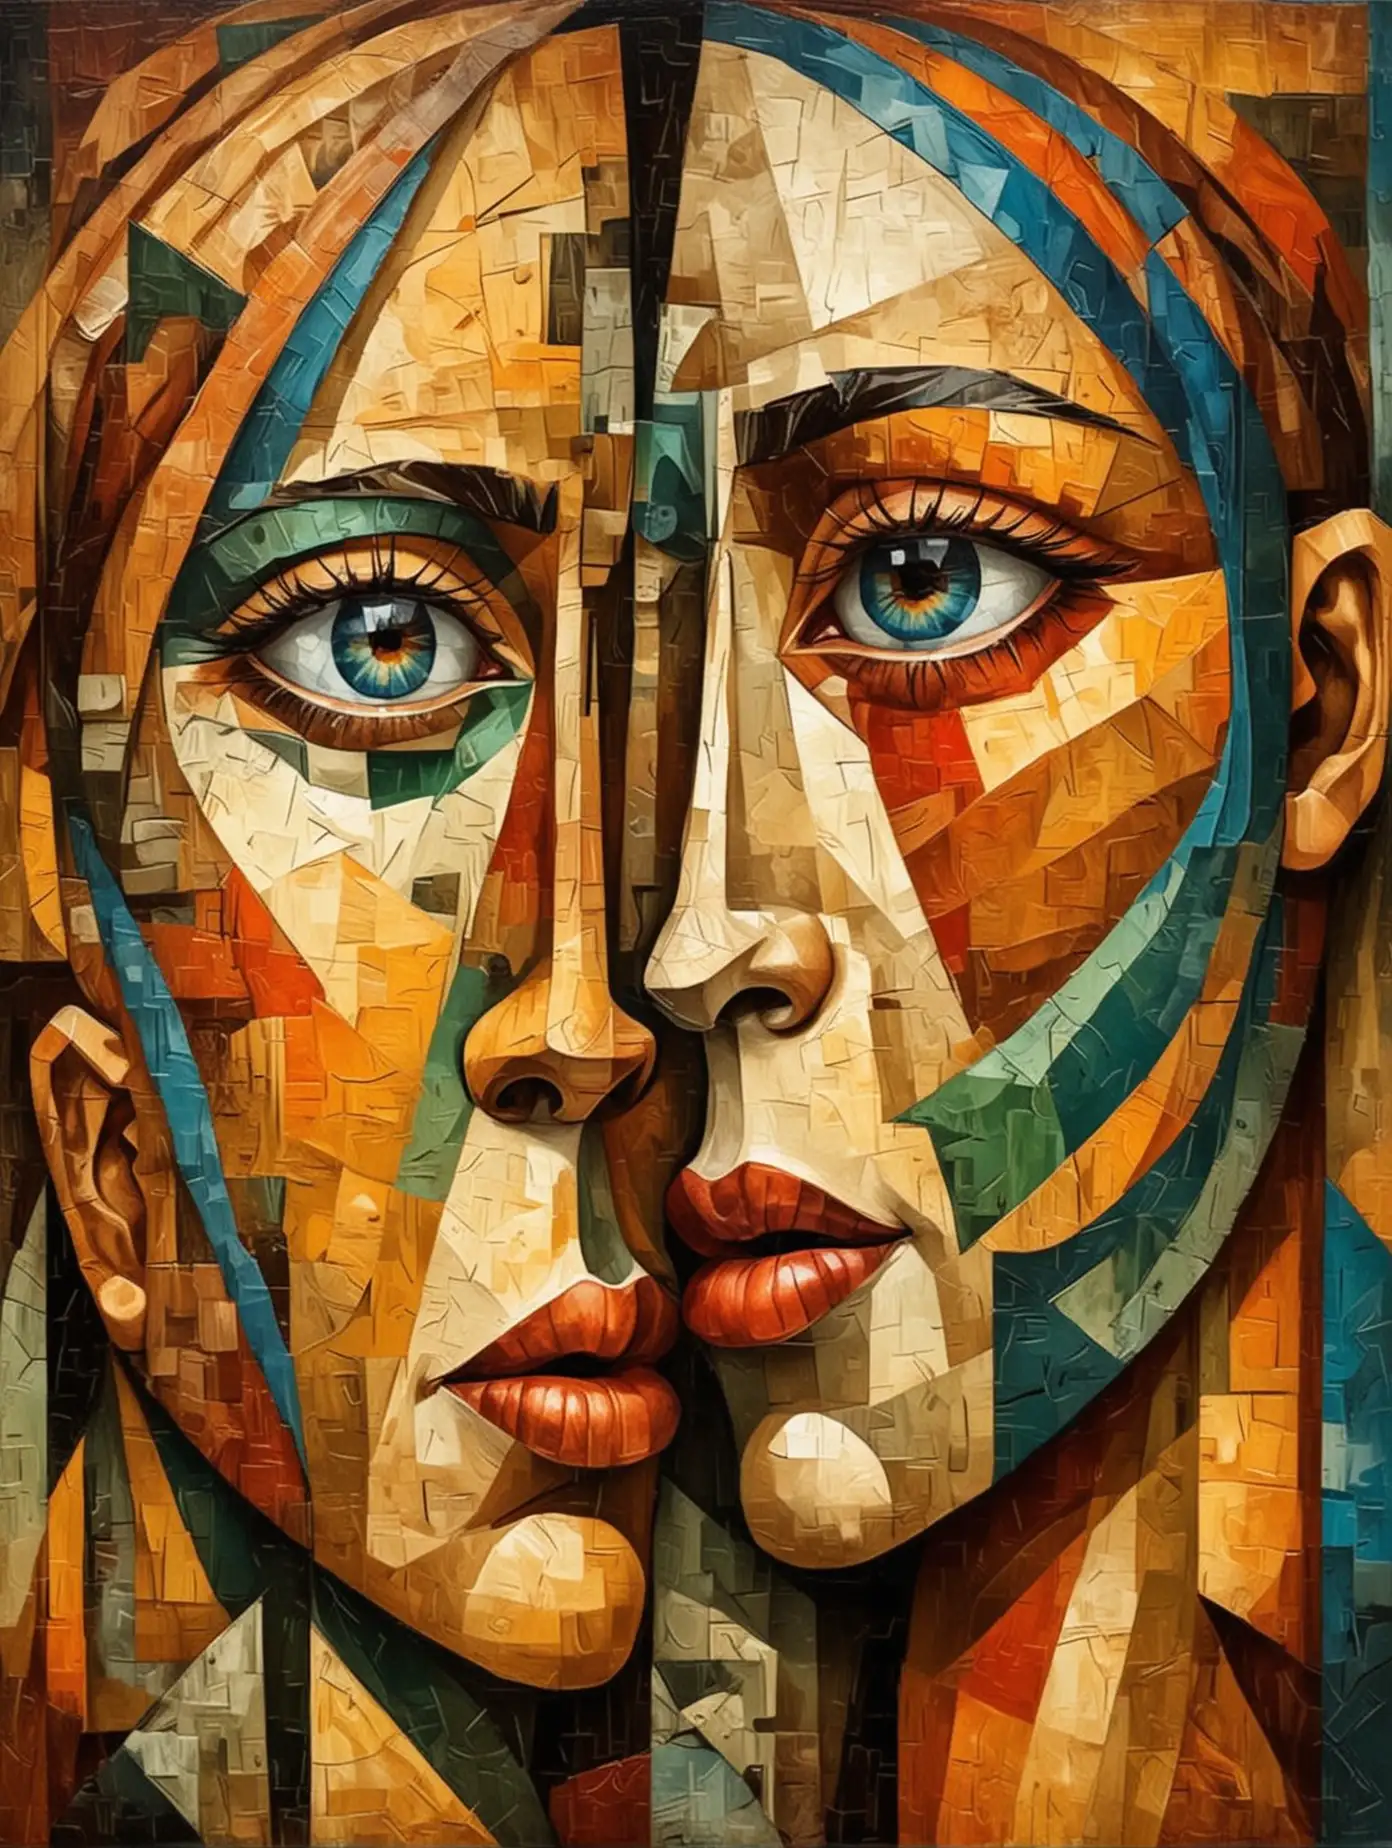 Intimate Cubist Embrace Harmonious Geometric Faces in Abstract Art